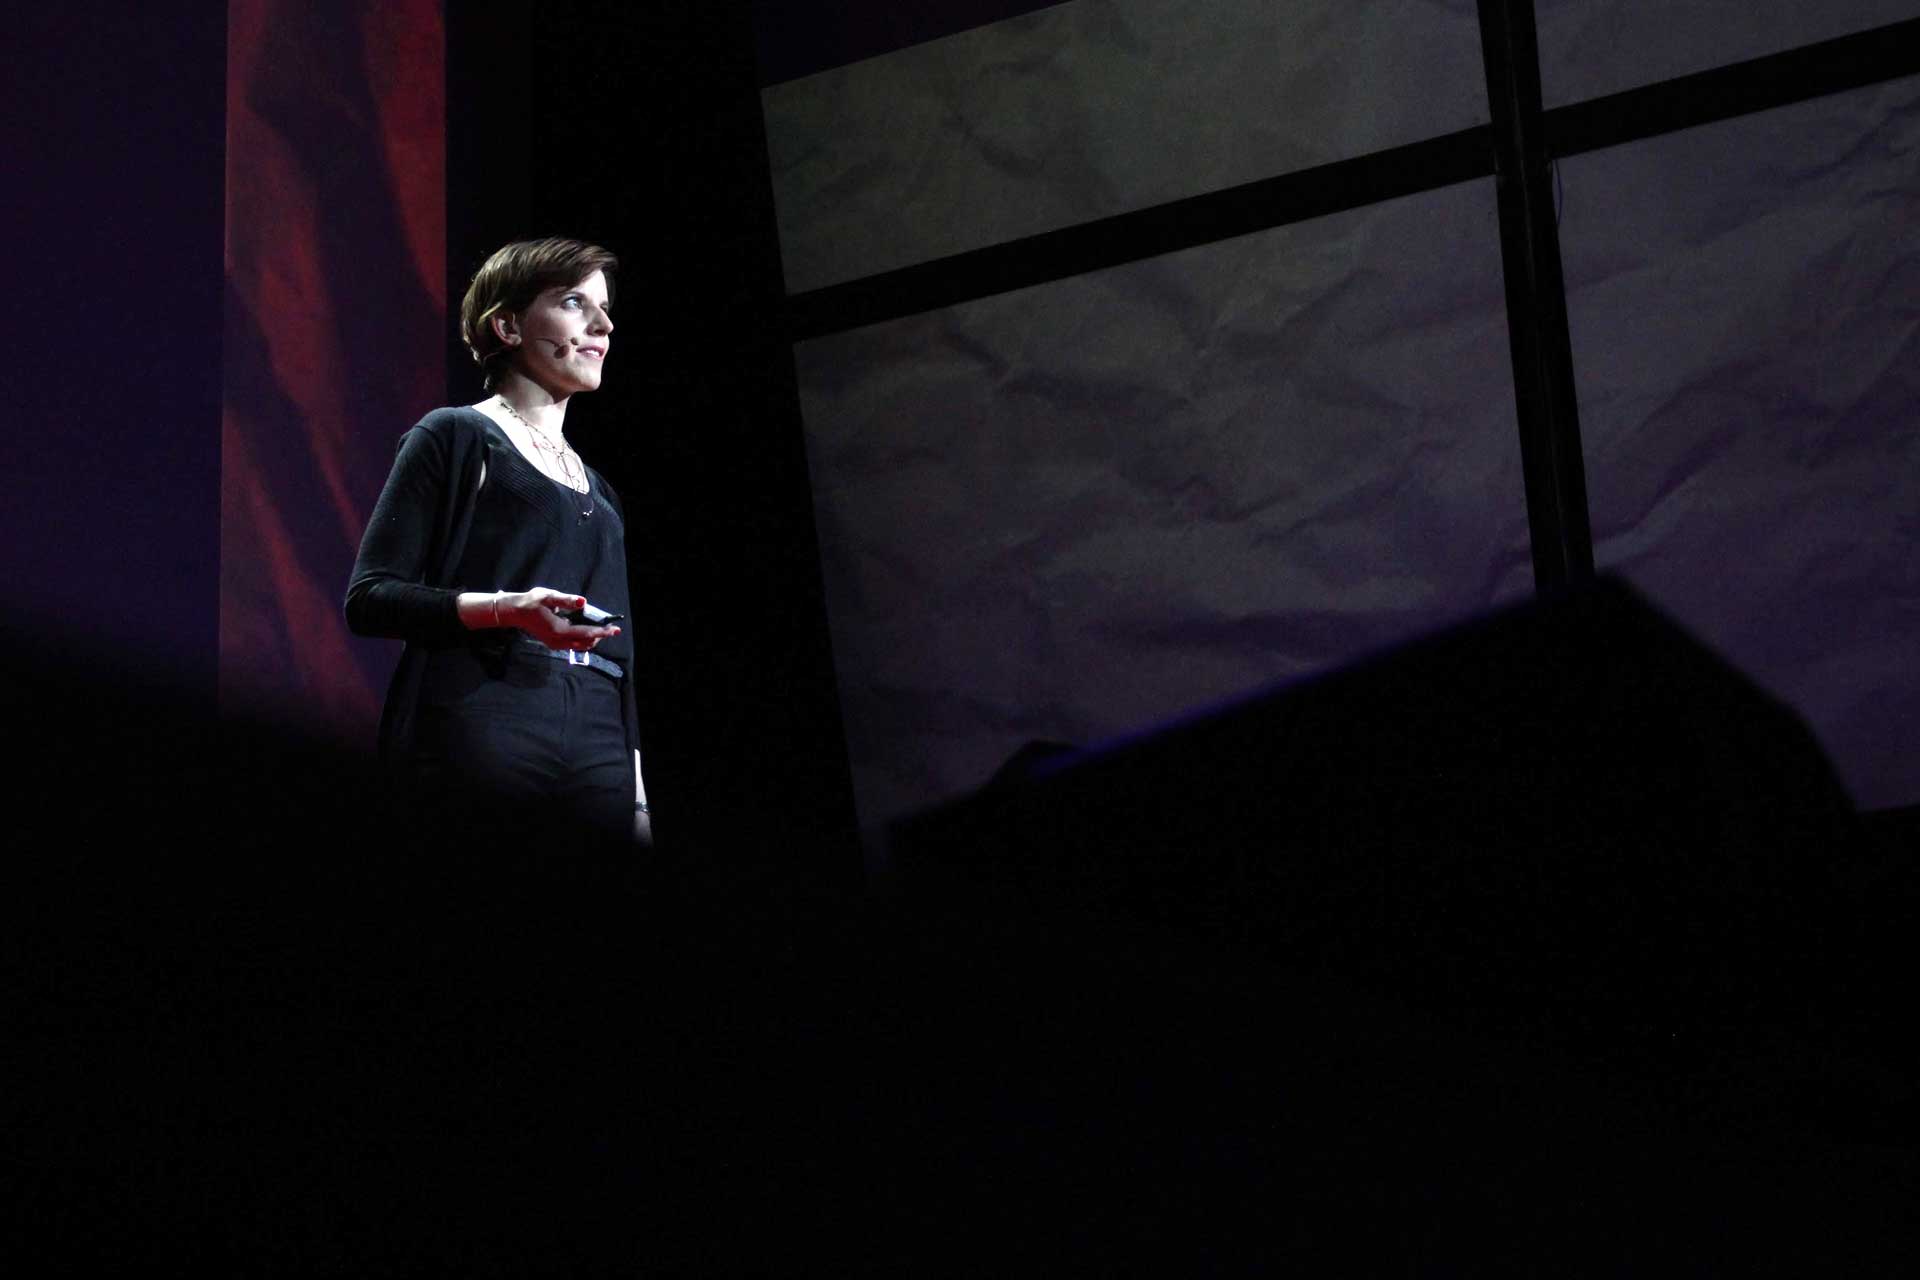 conference-TEDxParis-2013-13.jpg